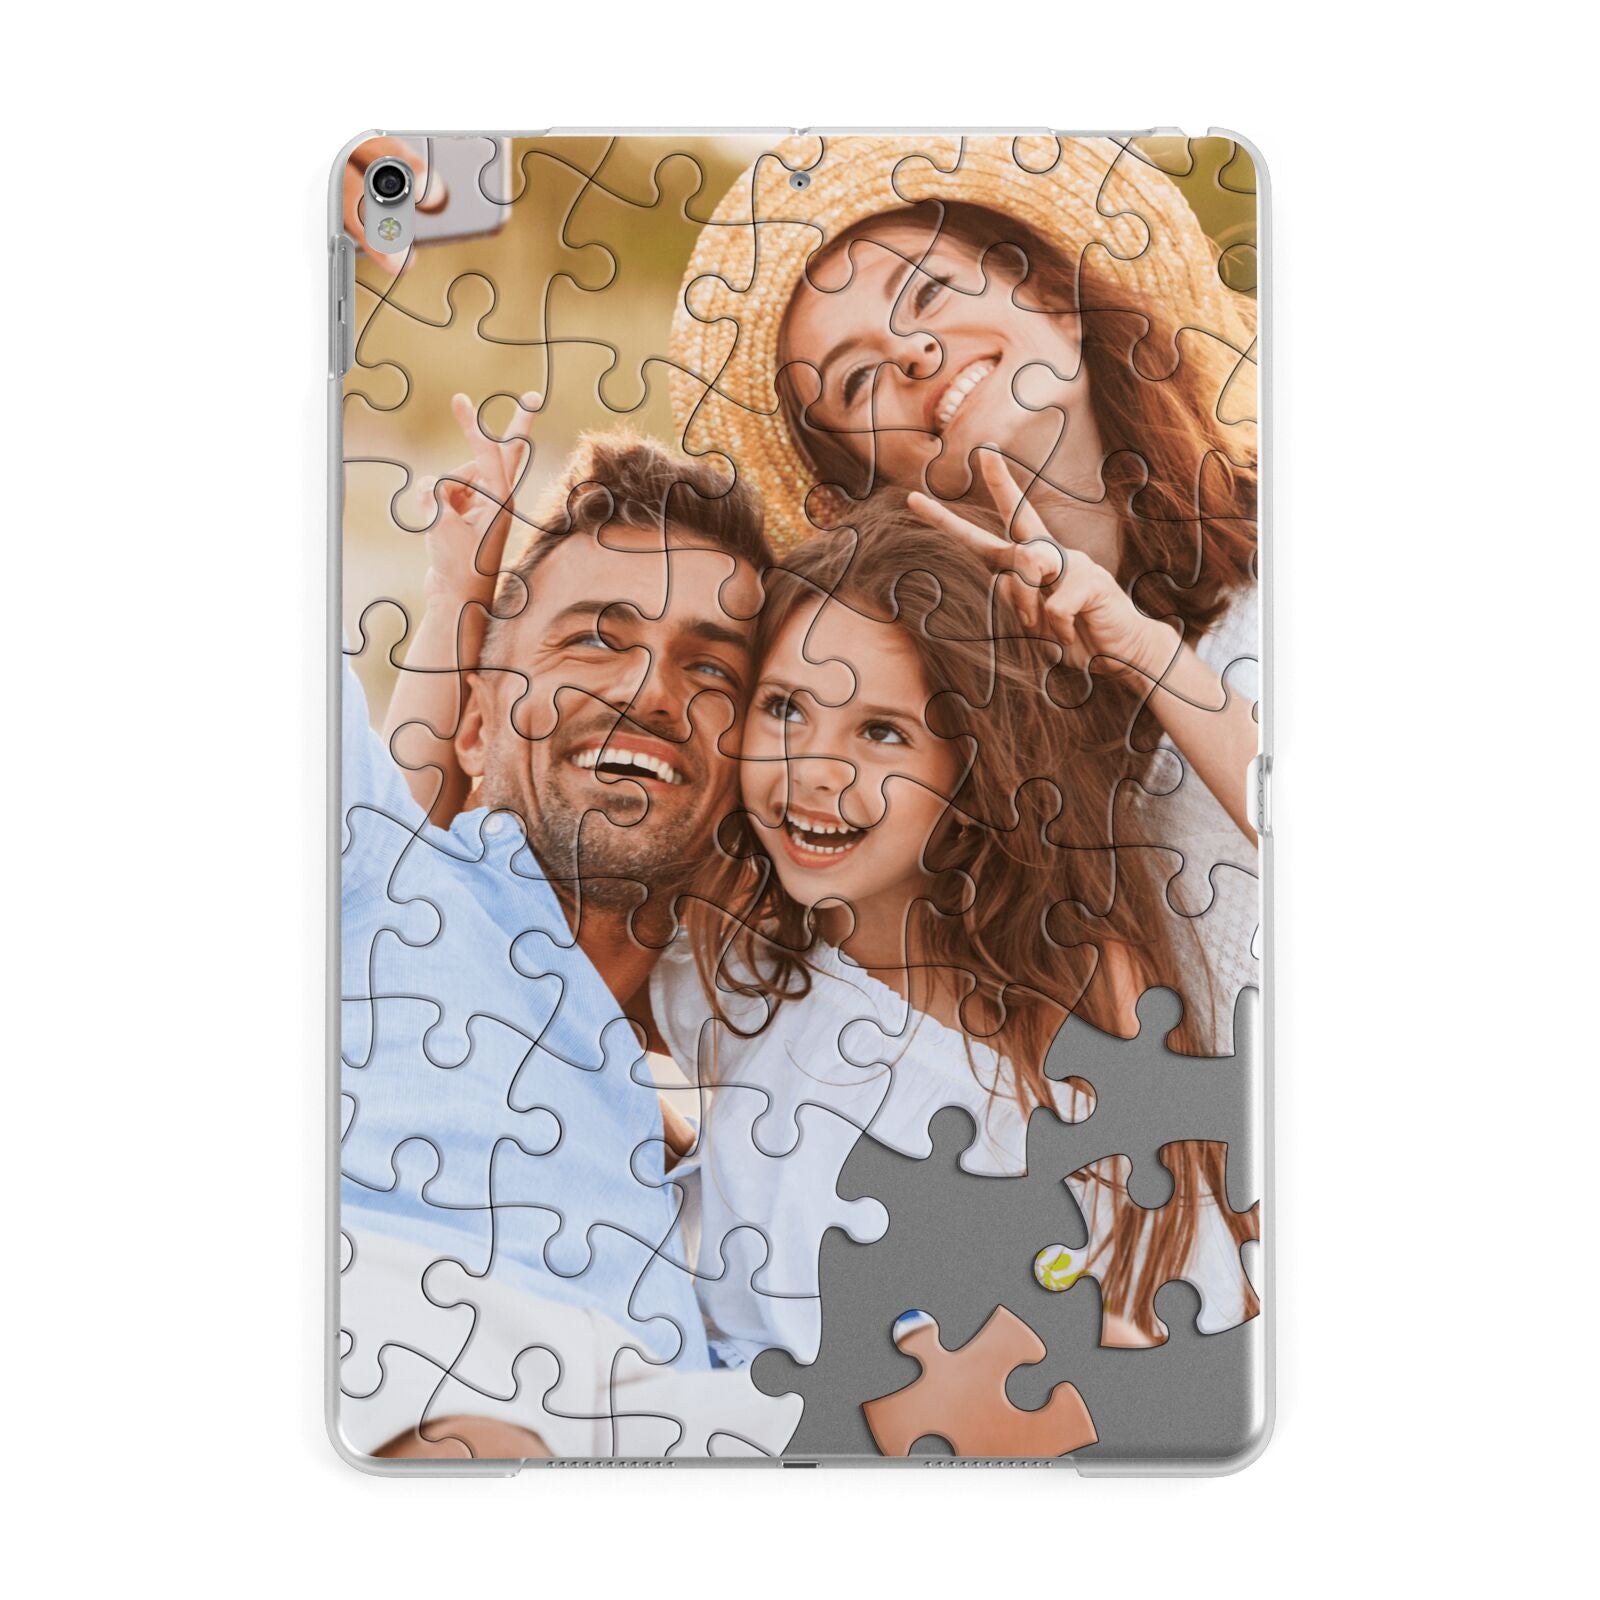 Personalised Photo Upload Puzzle Effect Apple iPad Silver Case